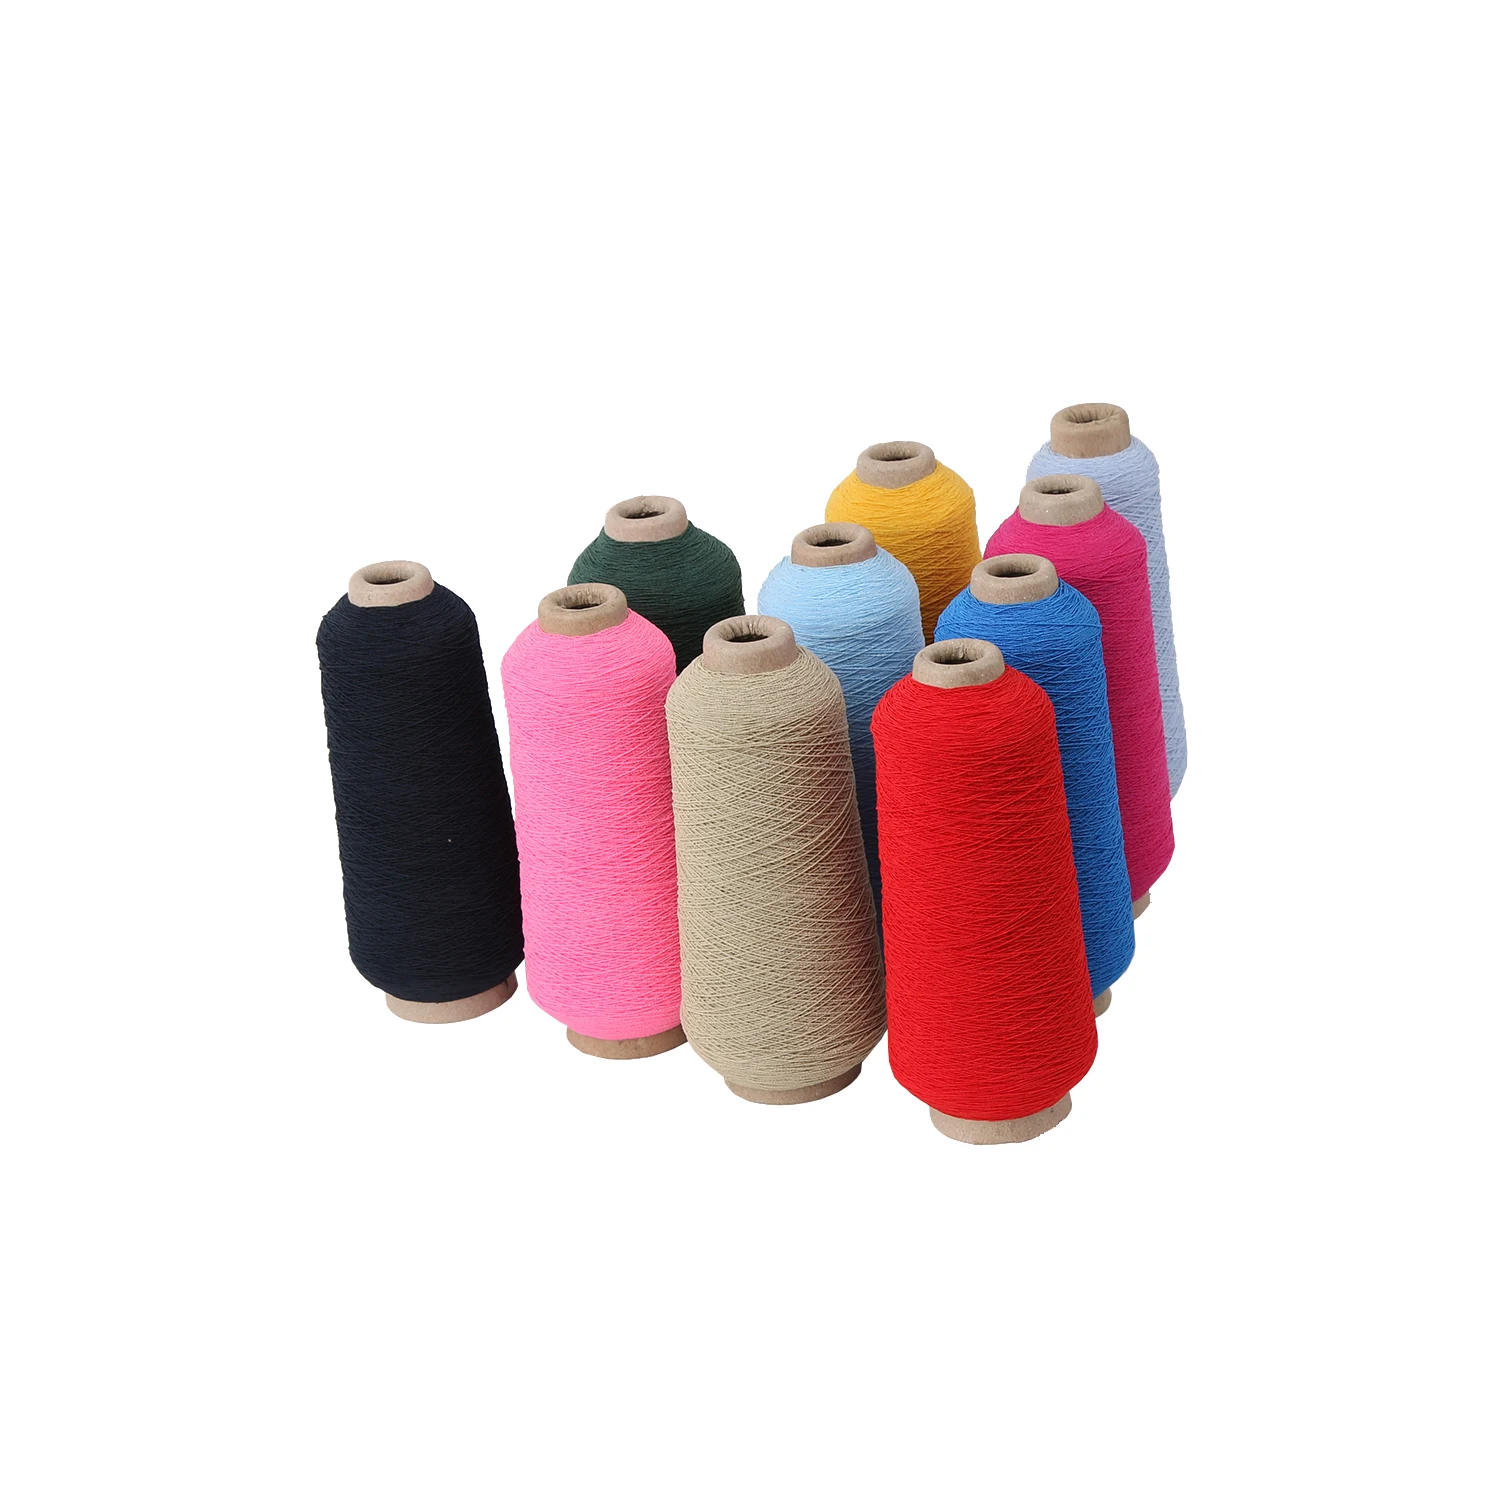 90# 100# 110# Nylon Rubber Covered Yarn Covering Rubber Yarn High Elastic Rubber Latex Double Covered Yarn